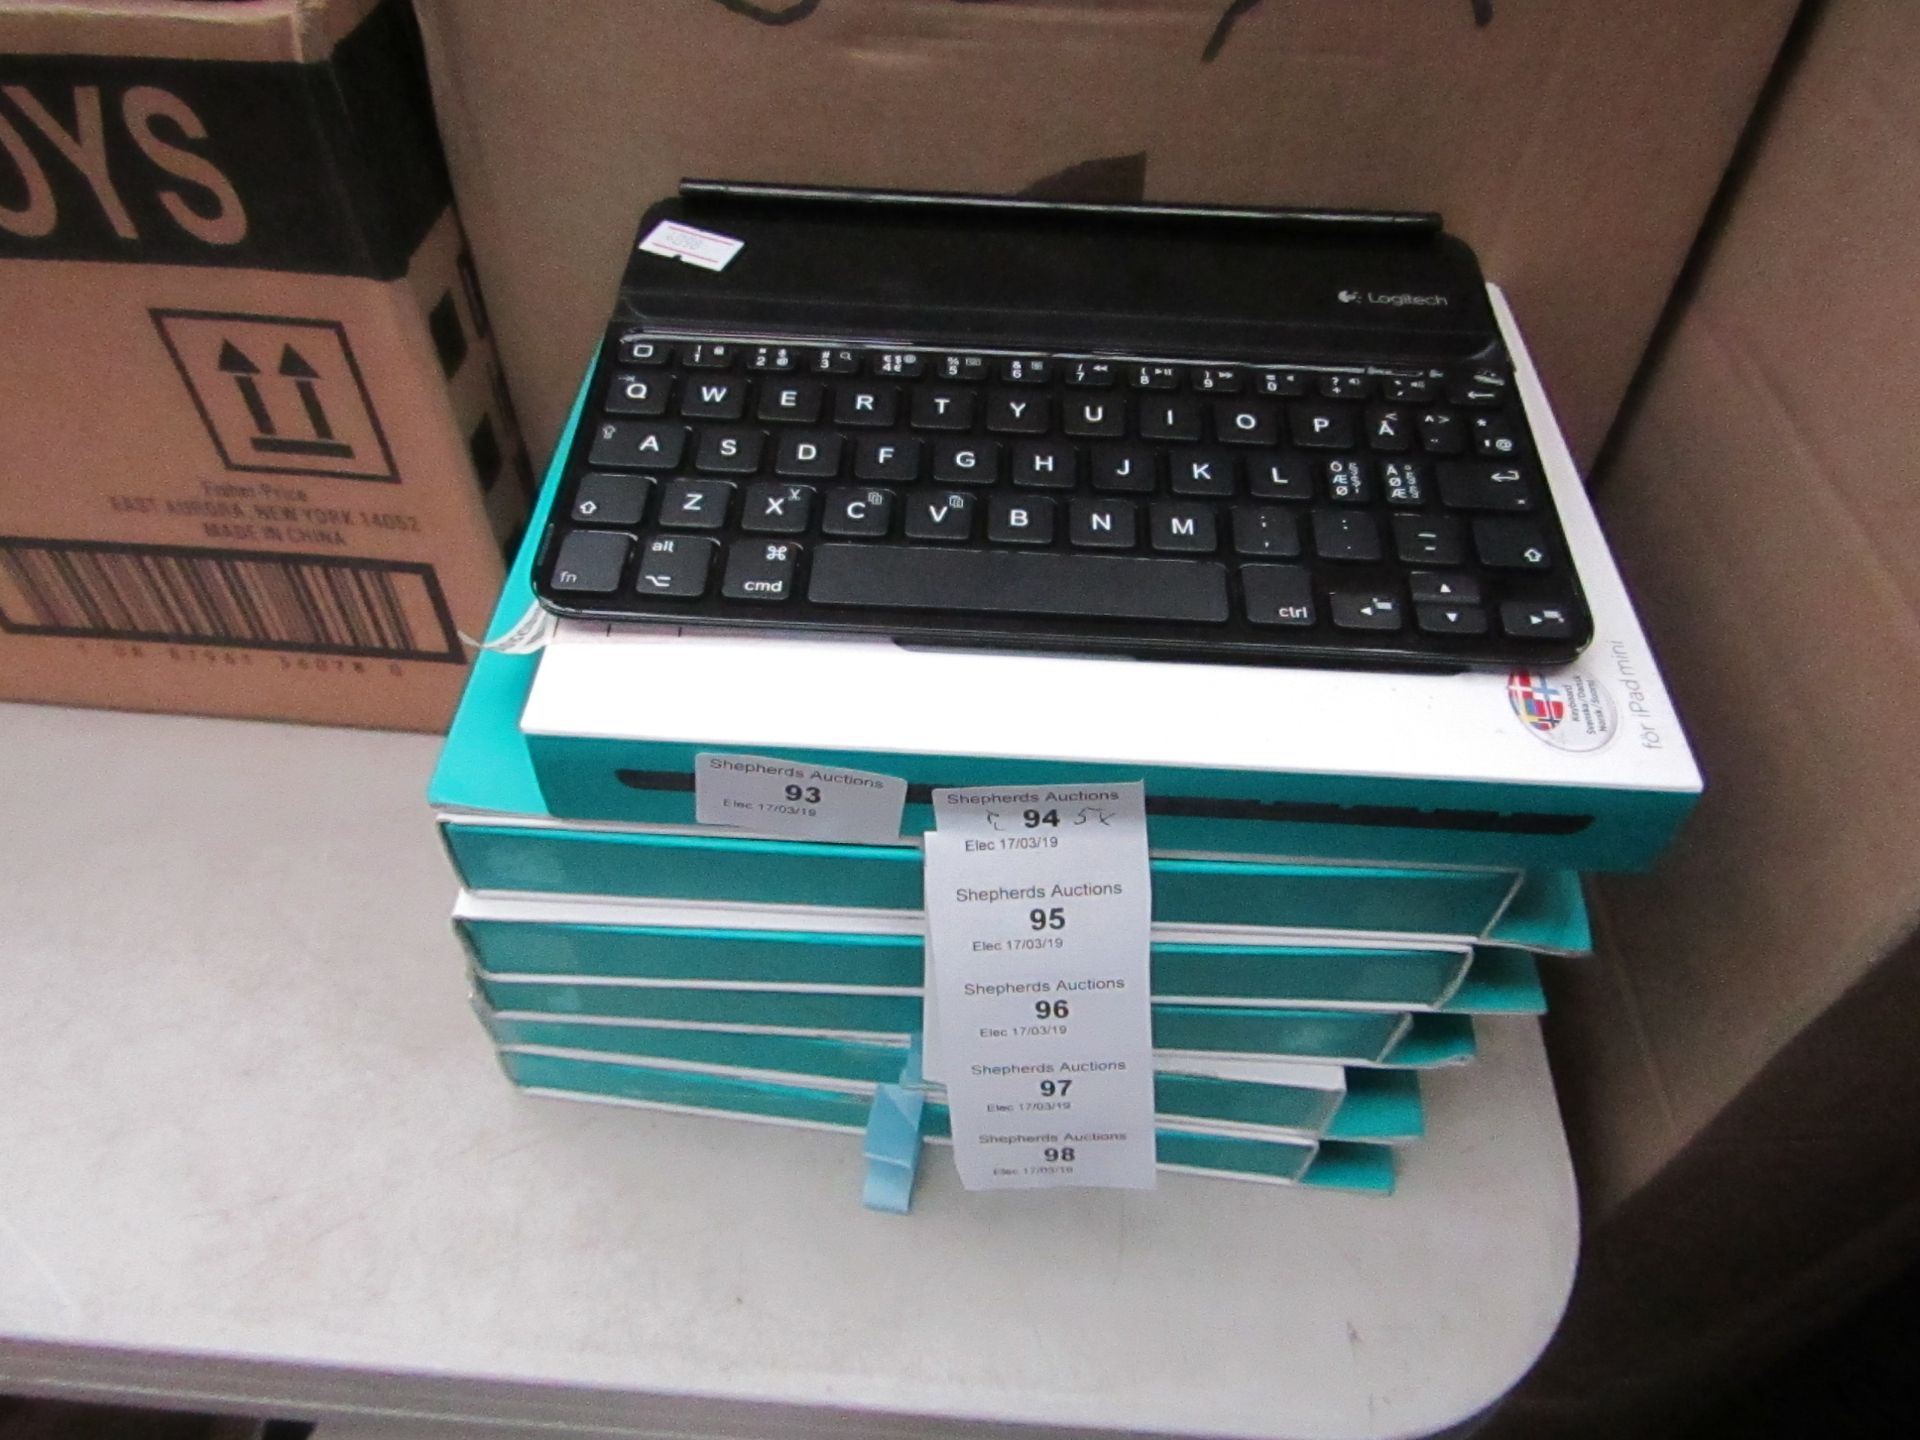 5x Logitech mini tablet keyboards, all new and boxed.